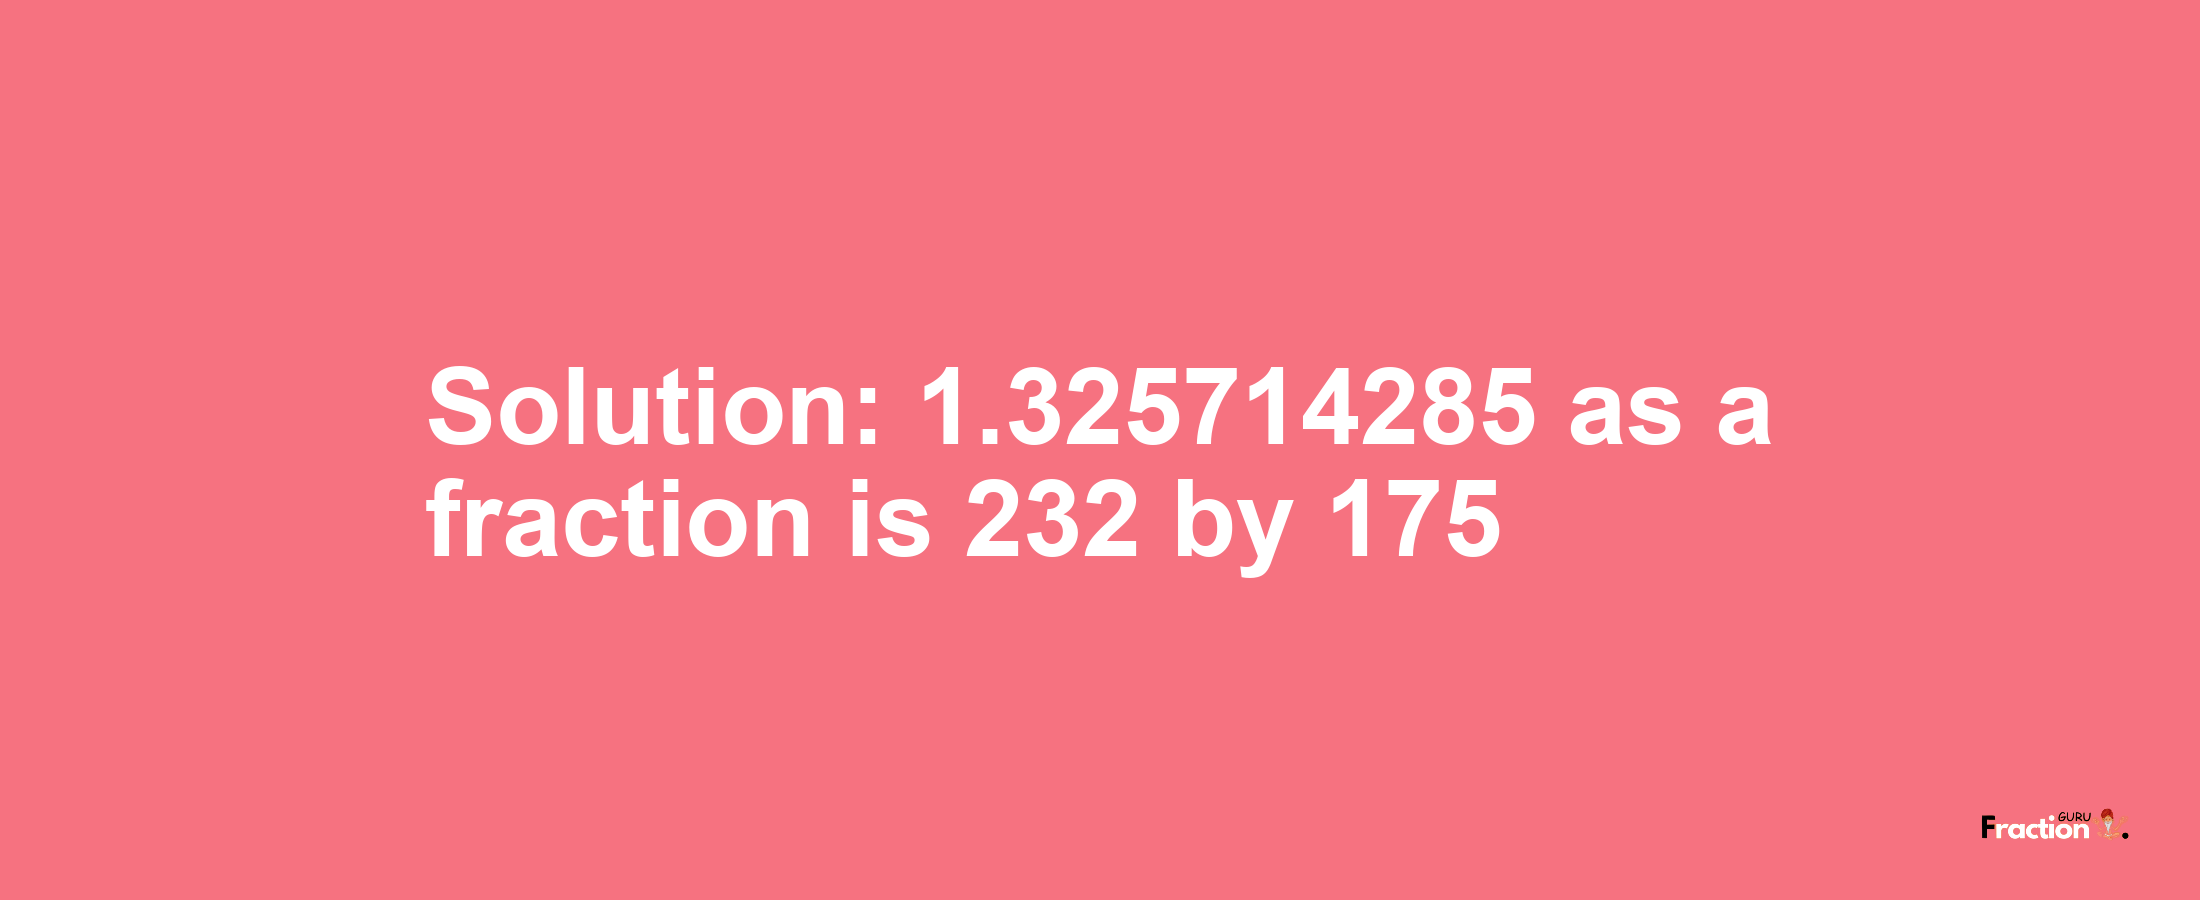 Solution:1.325714285 as a fraction is 232/175